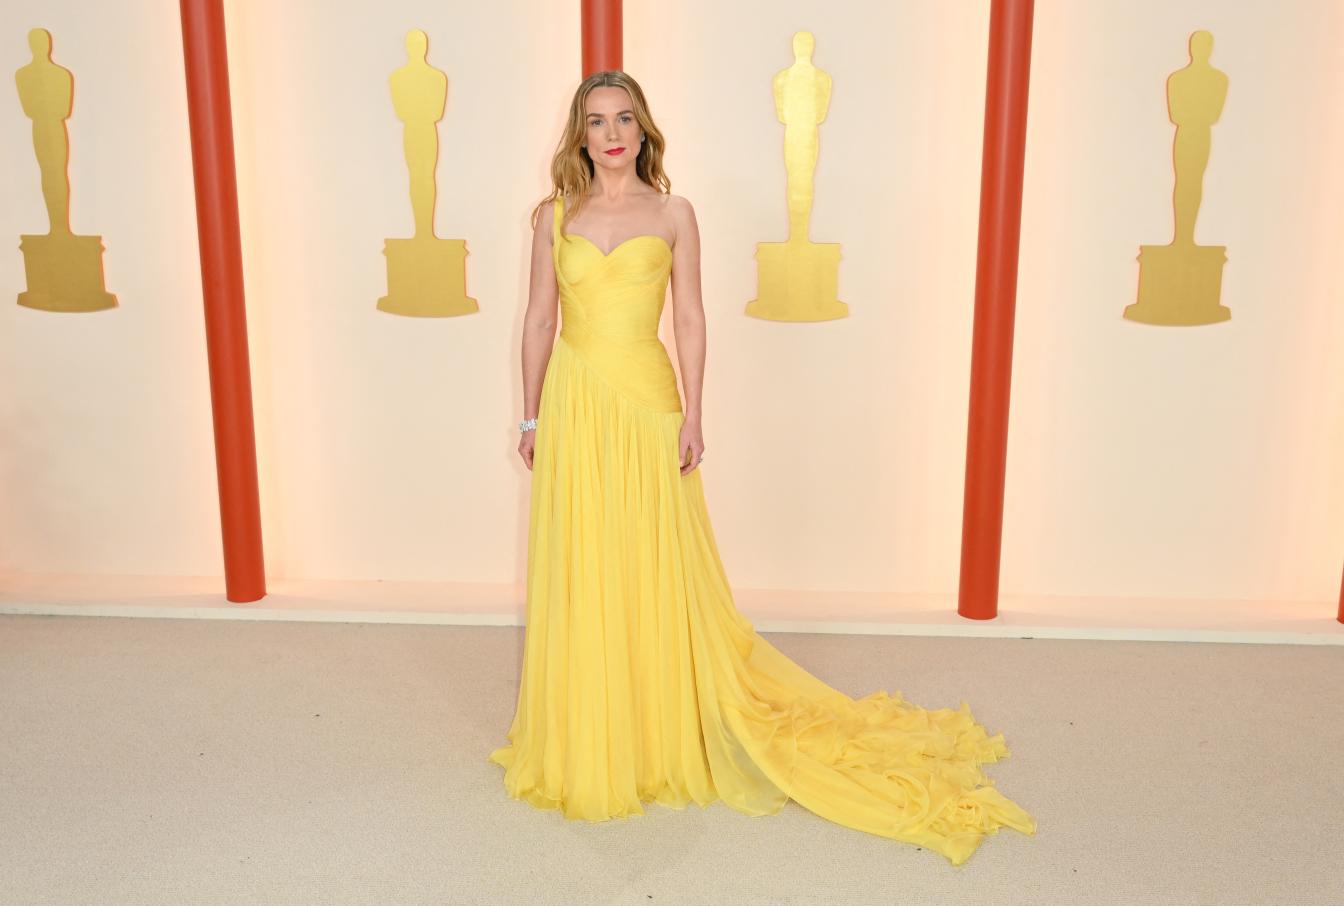 Irish actress Kerry Condon attends the 95th Annual Academy Awards at the Dolby Theatre in Hollywood